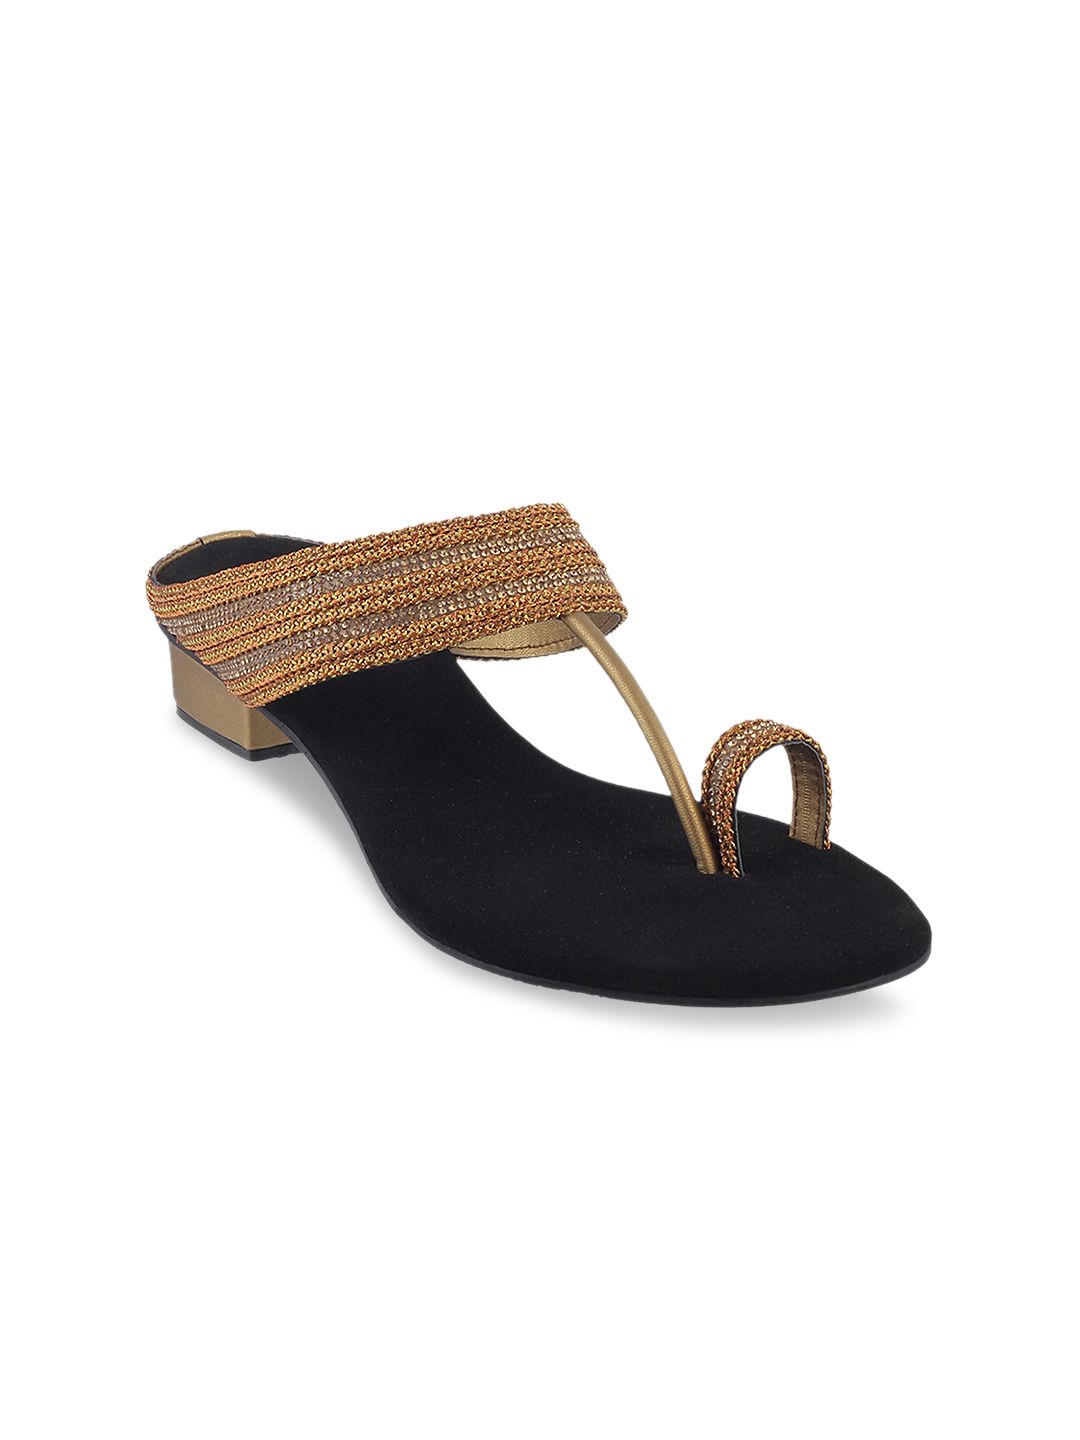 Mochi Women Gold-Toned Woven Design Sandals Price in India